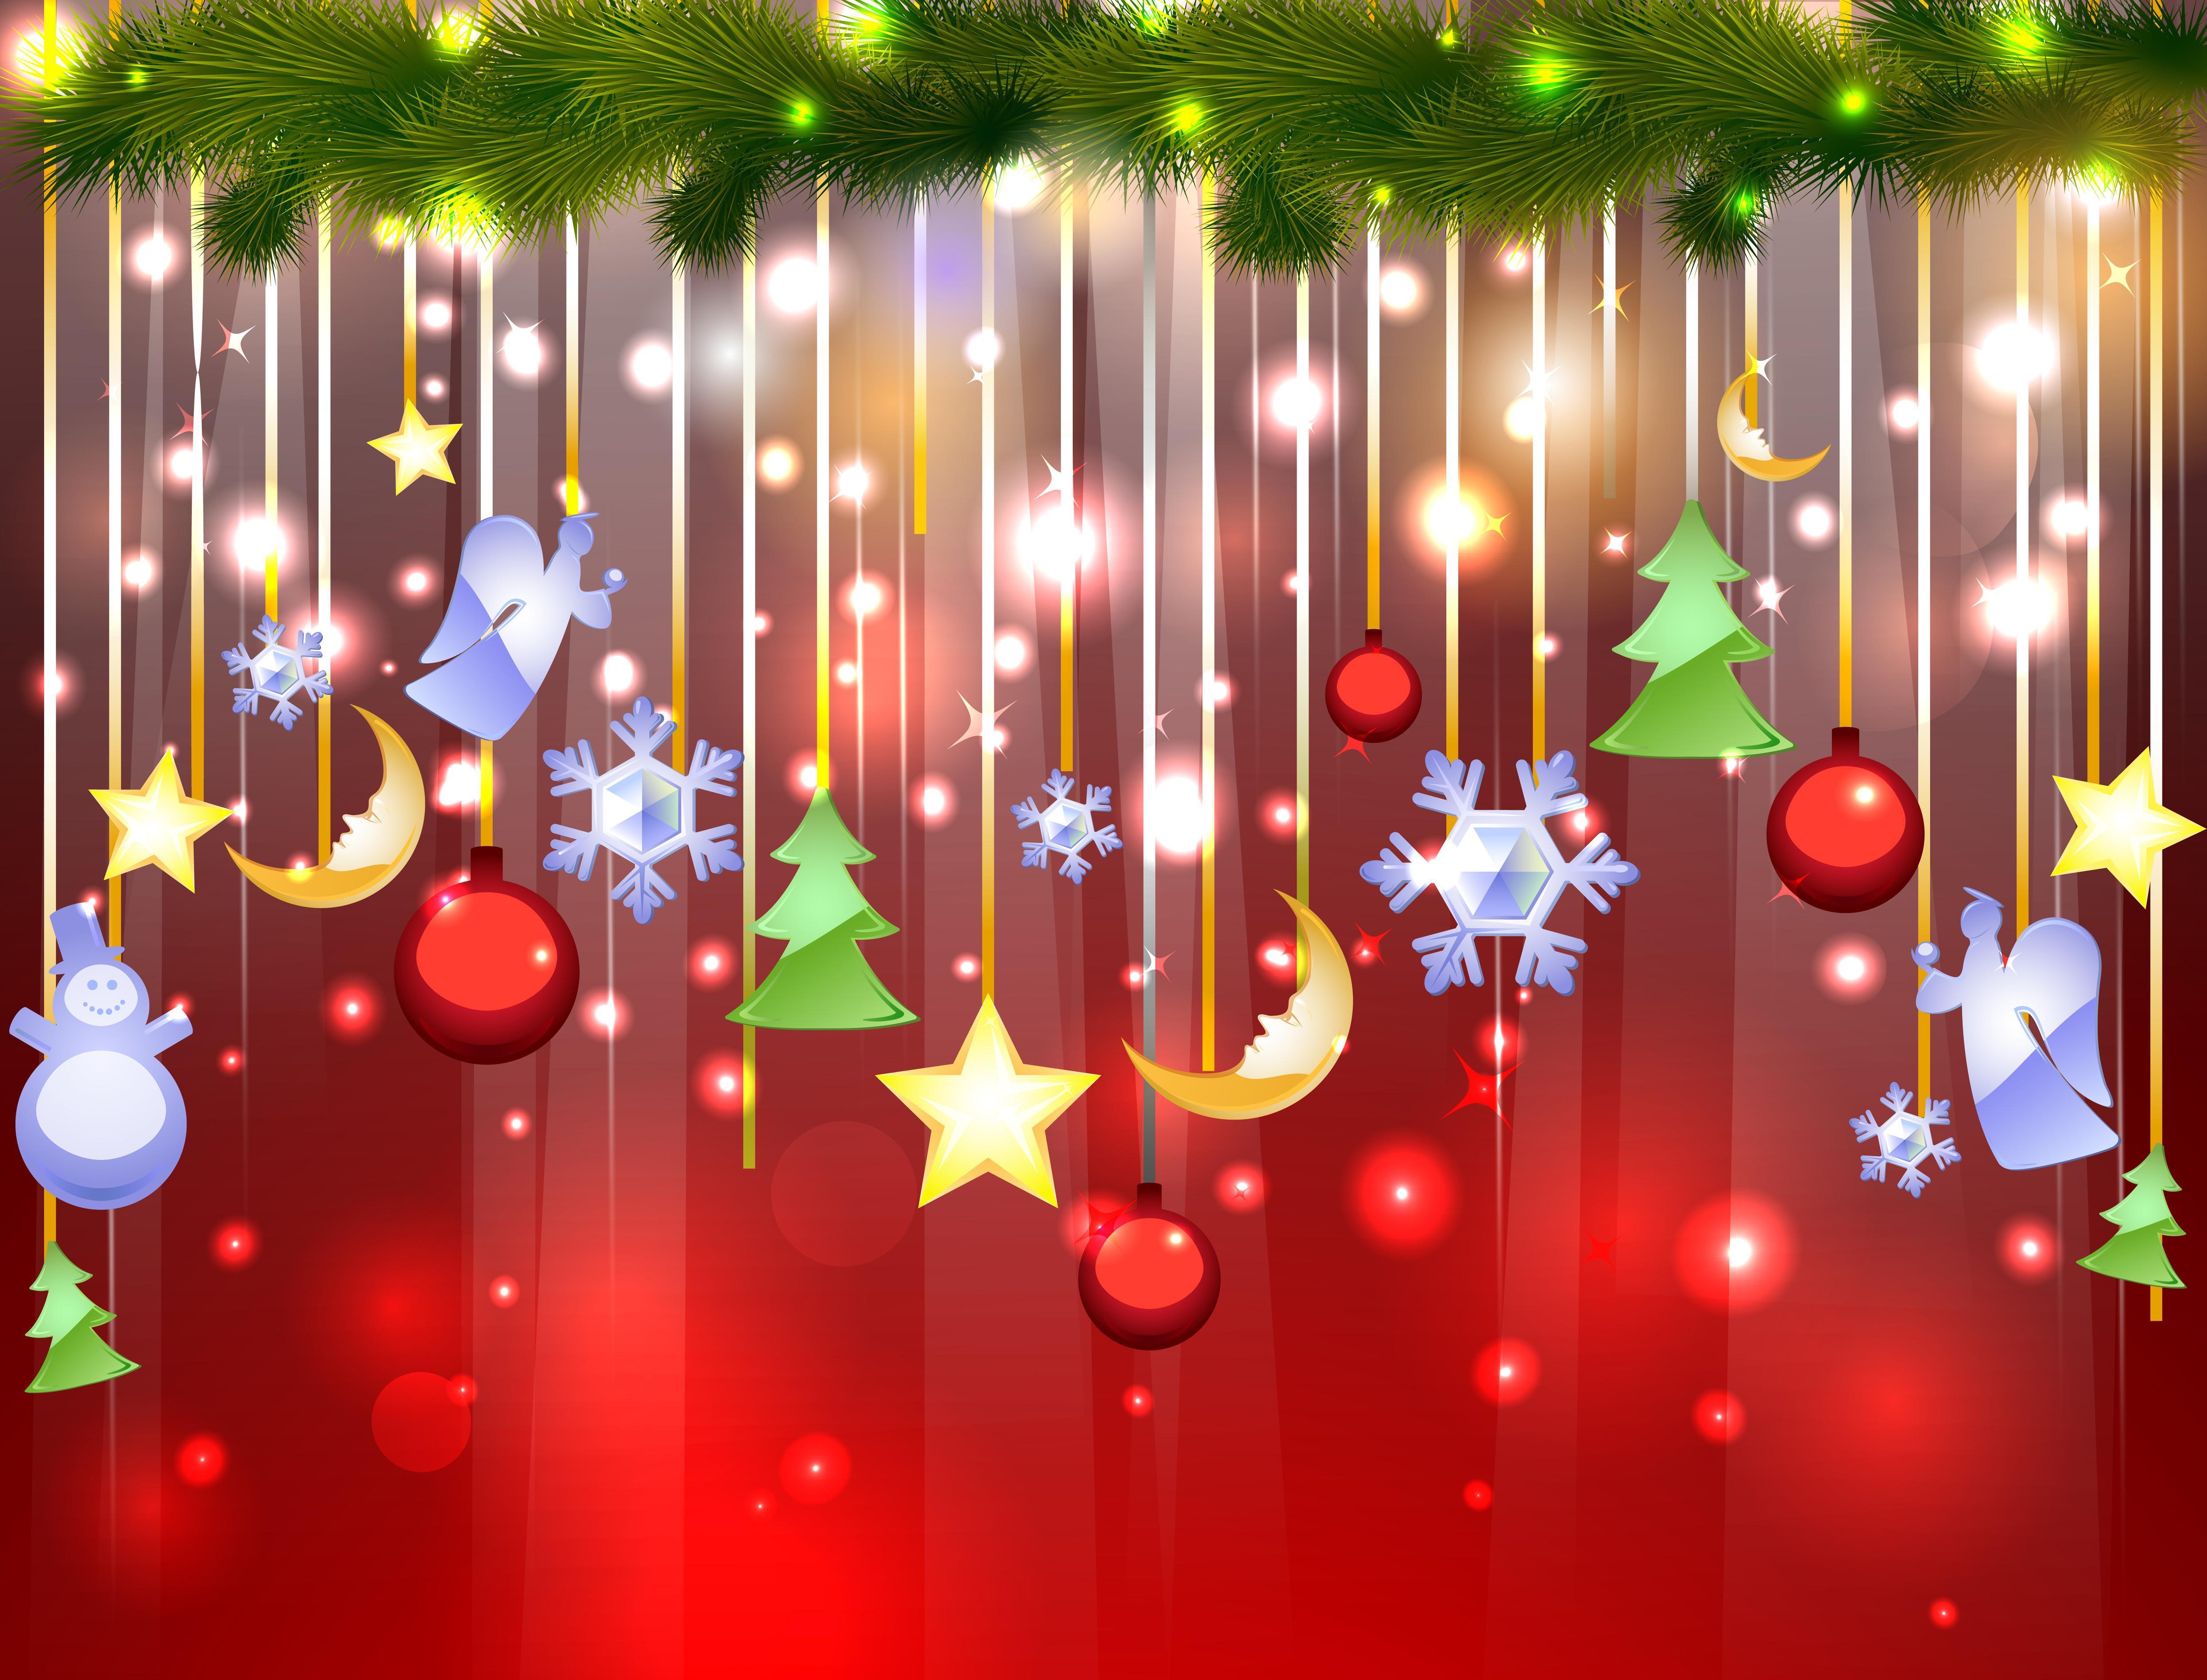 Christmas theme wallpapers and images - wallpapers, pictures, photos